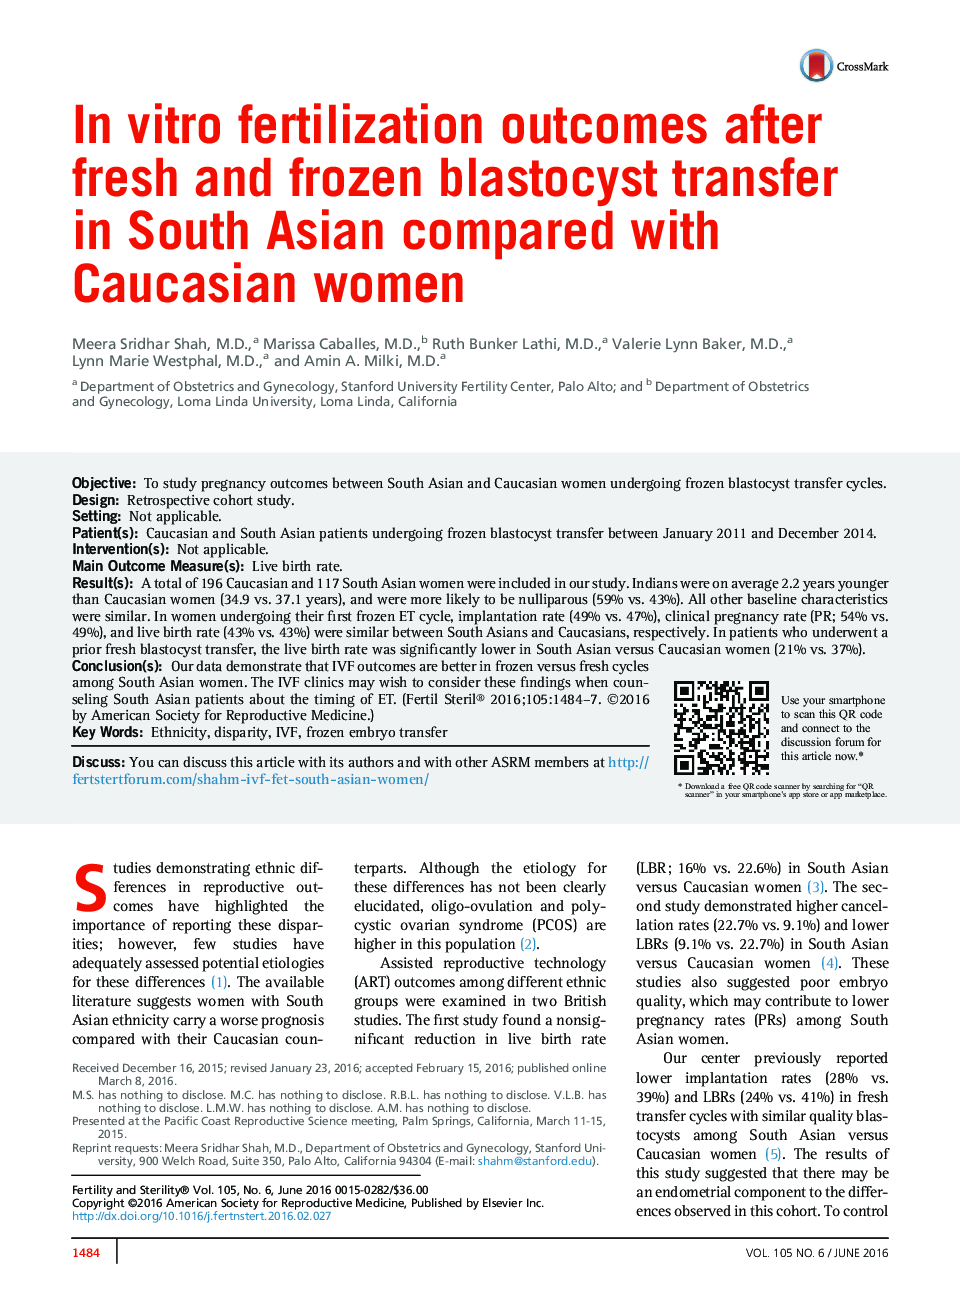 InÂ vitro fertilization outcomes after fresh and frozen blastocyst transfer inÂ South Asian compared with Caucasian women